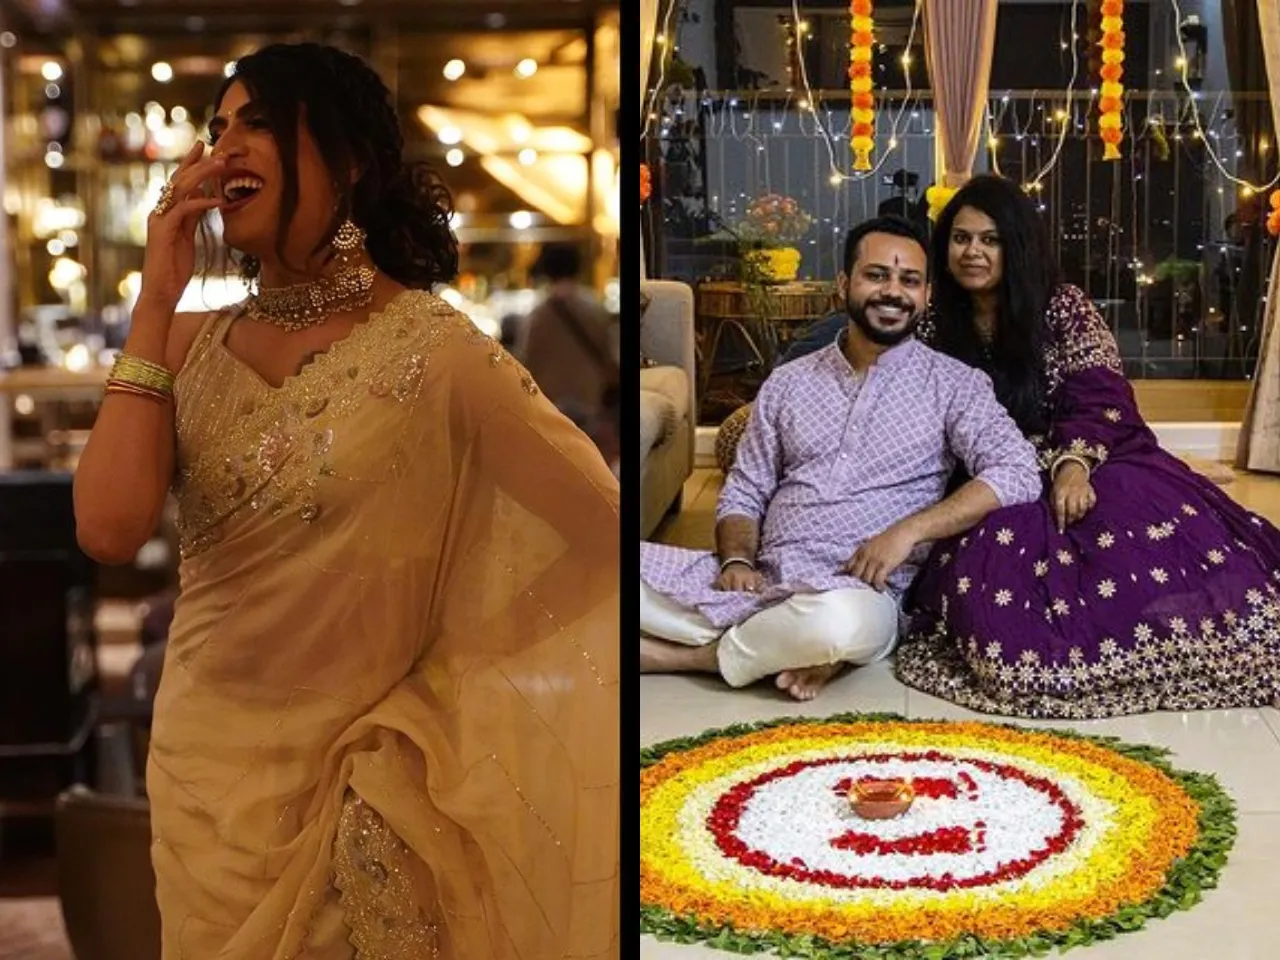 Meeting families to making memories, here's content creators and their dazzling Diwali bash